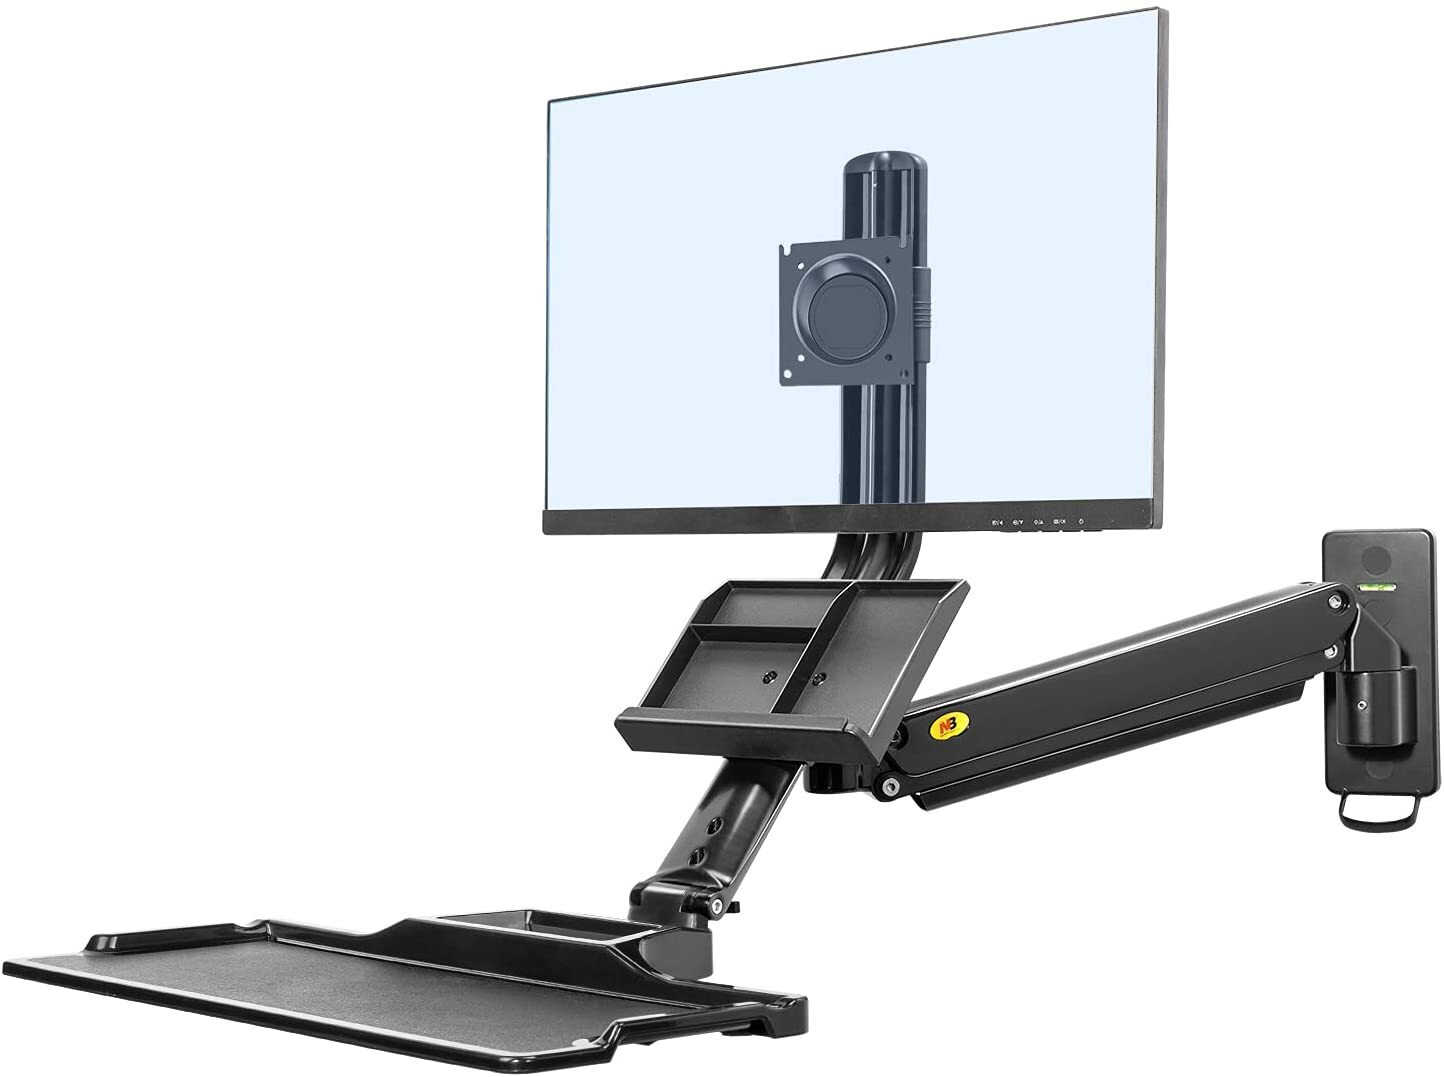 NB New Product Sit Stand Desk Wall Mount MB32 - Black